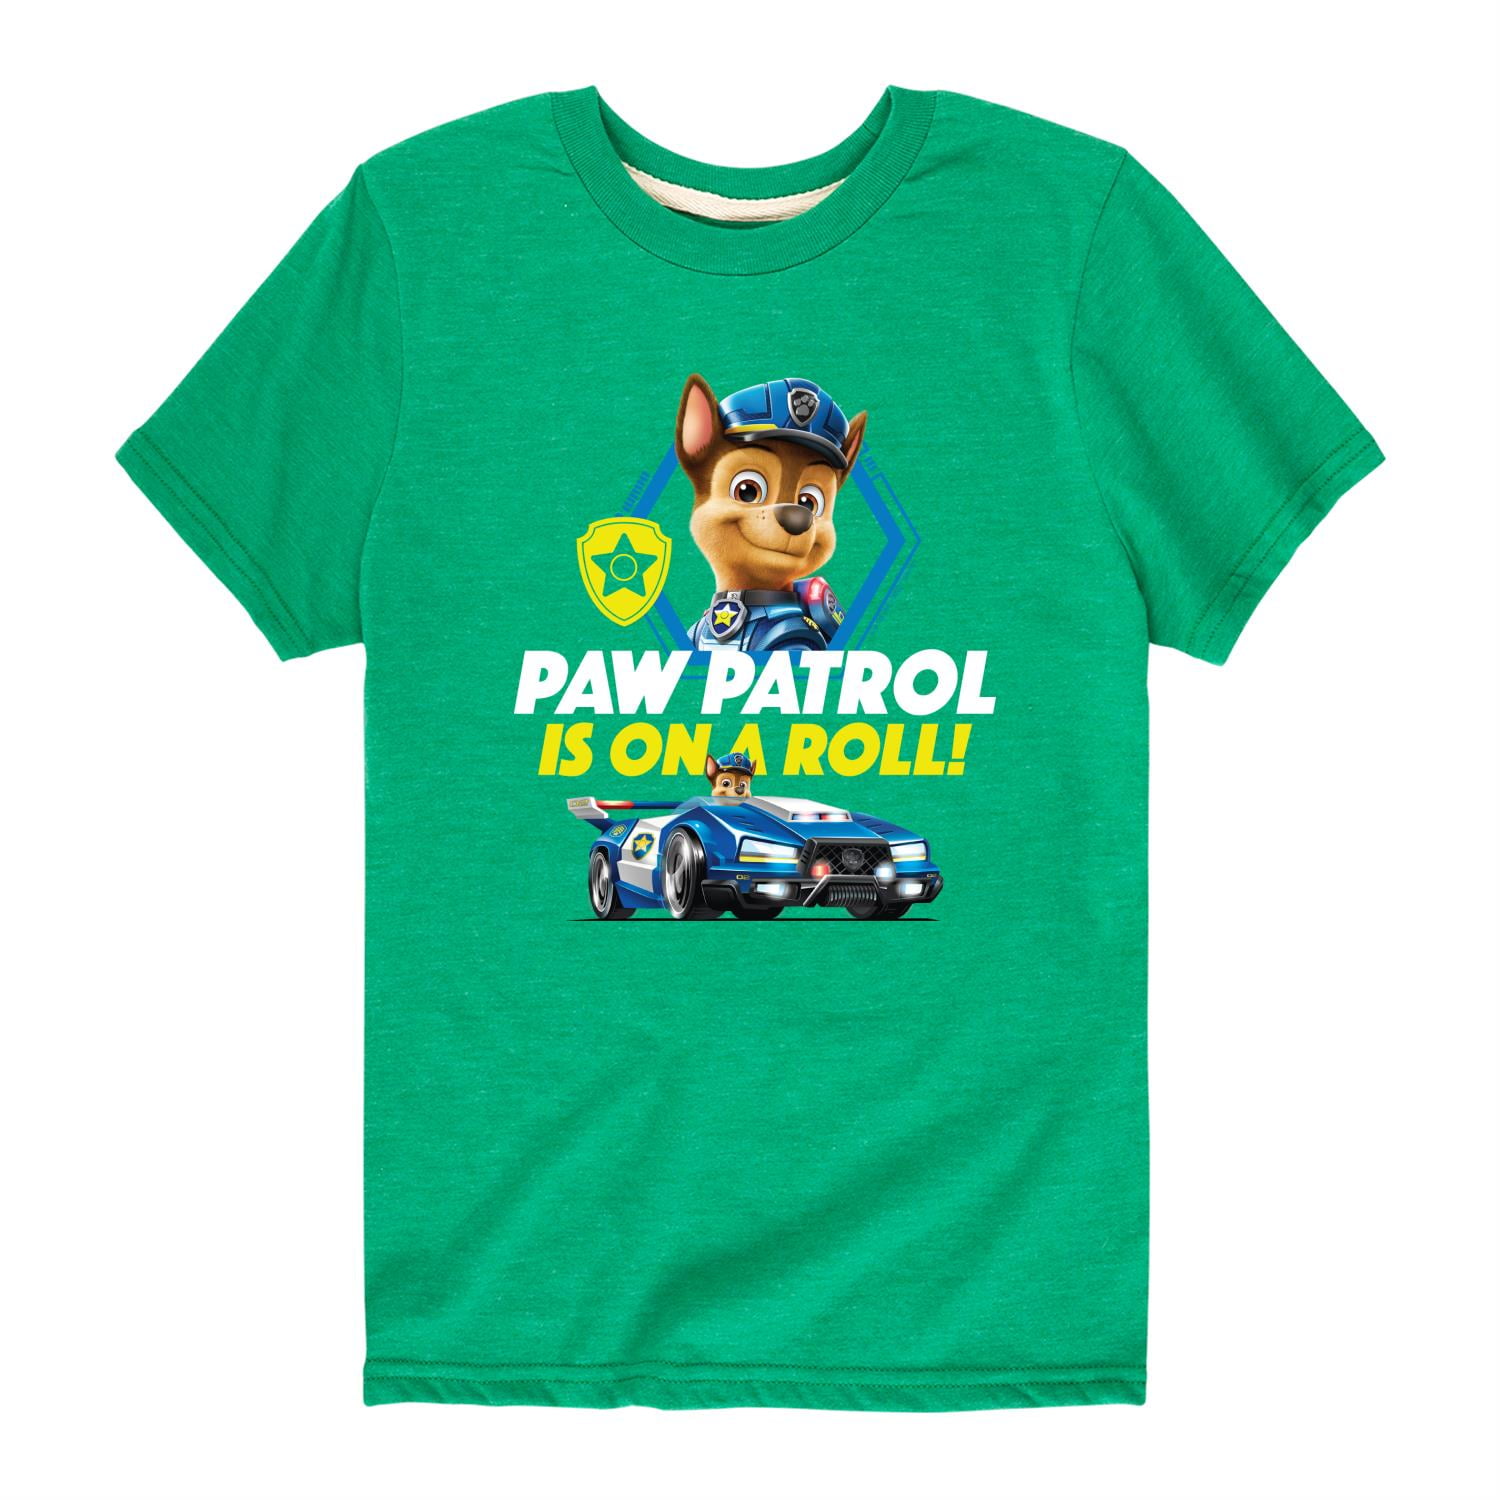 Paw Patrol - Paw Patrol Movie - Toddler And Youth Short Sleeve Graphic ...